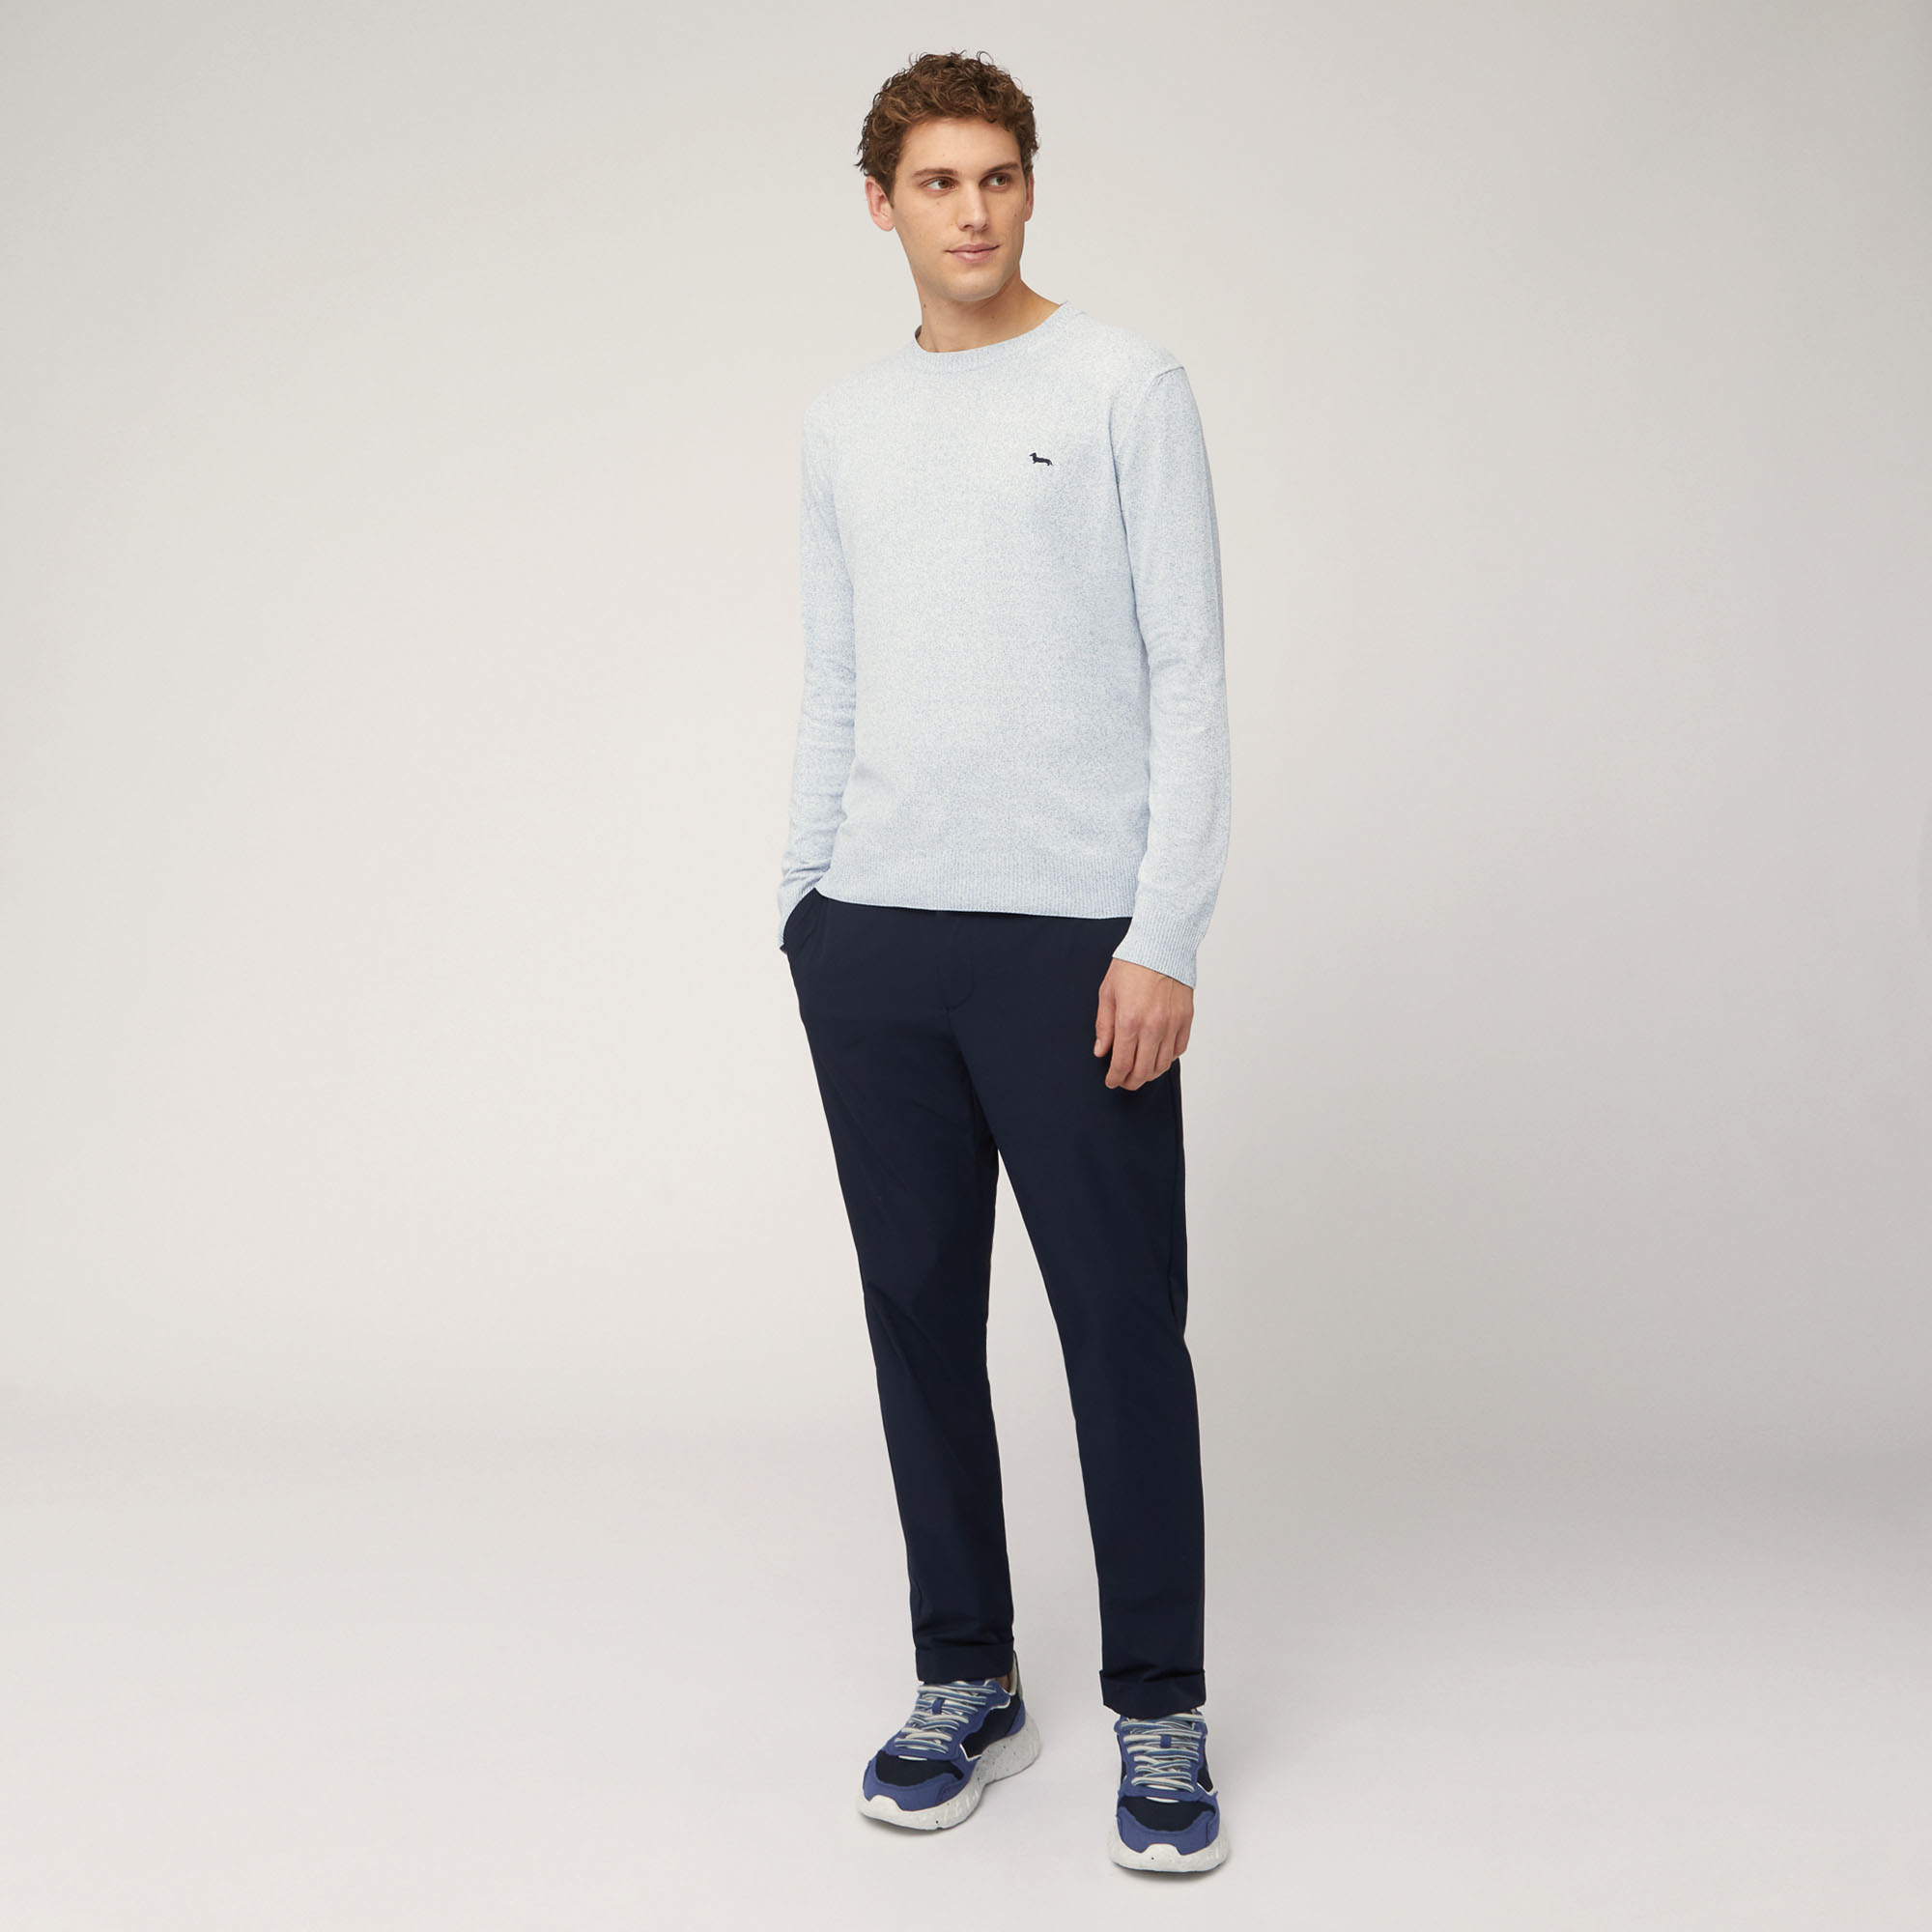 Crew Neck Pullover in Technical Yarn, Blue, large image number 3